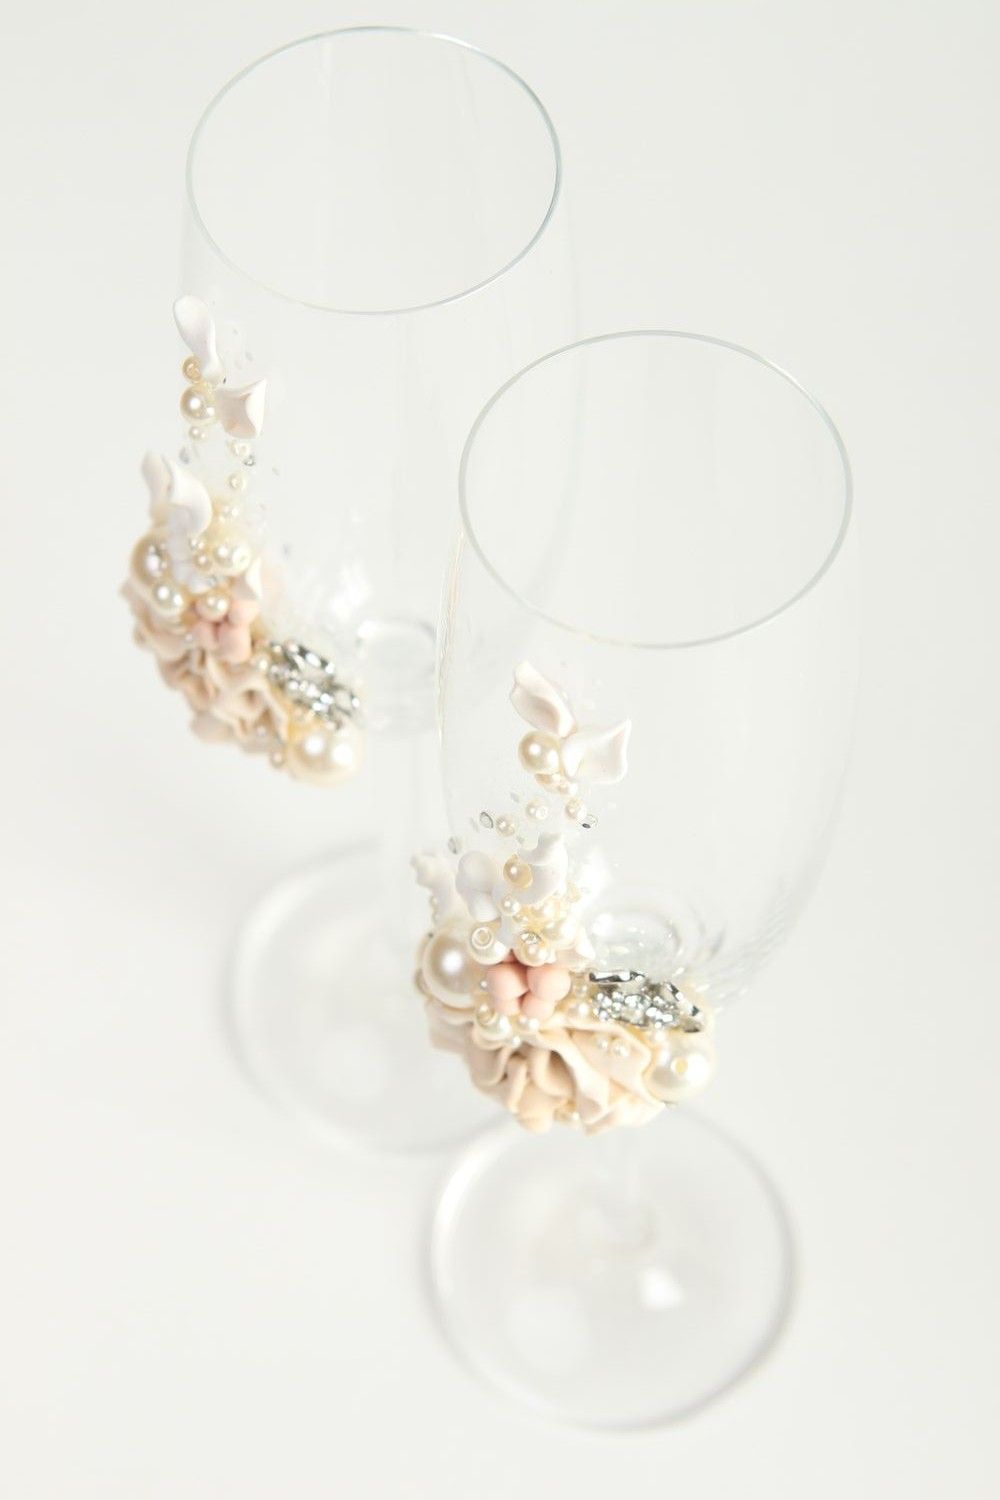 Wedding glasses handmade lovely present beautiful accessories with pearls photo 7